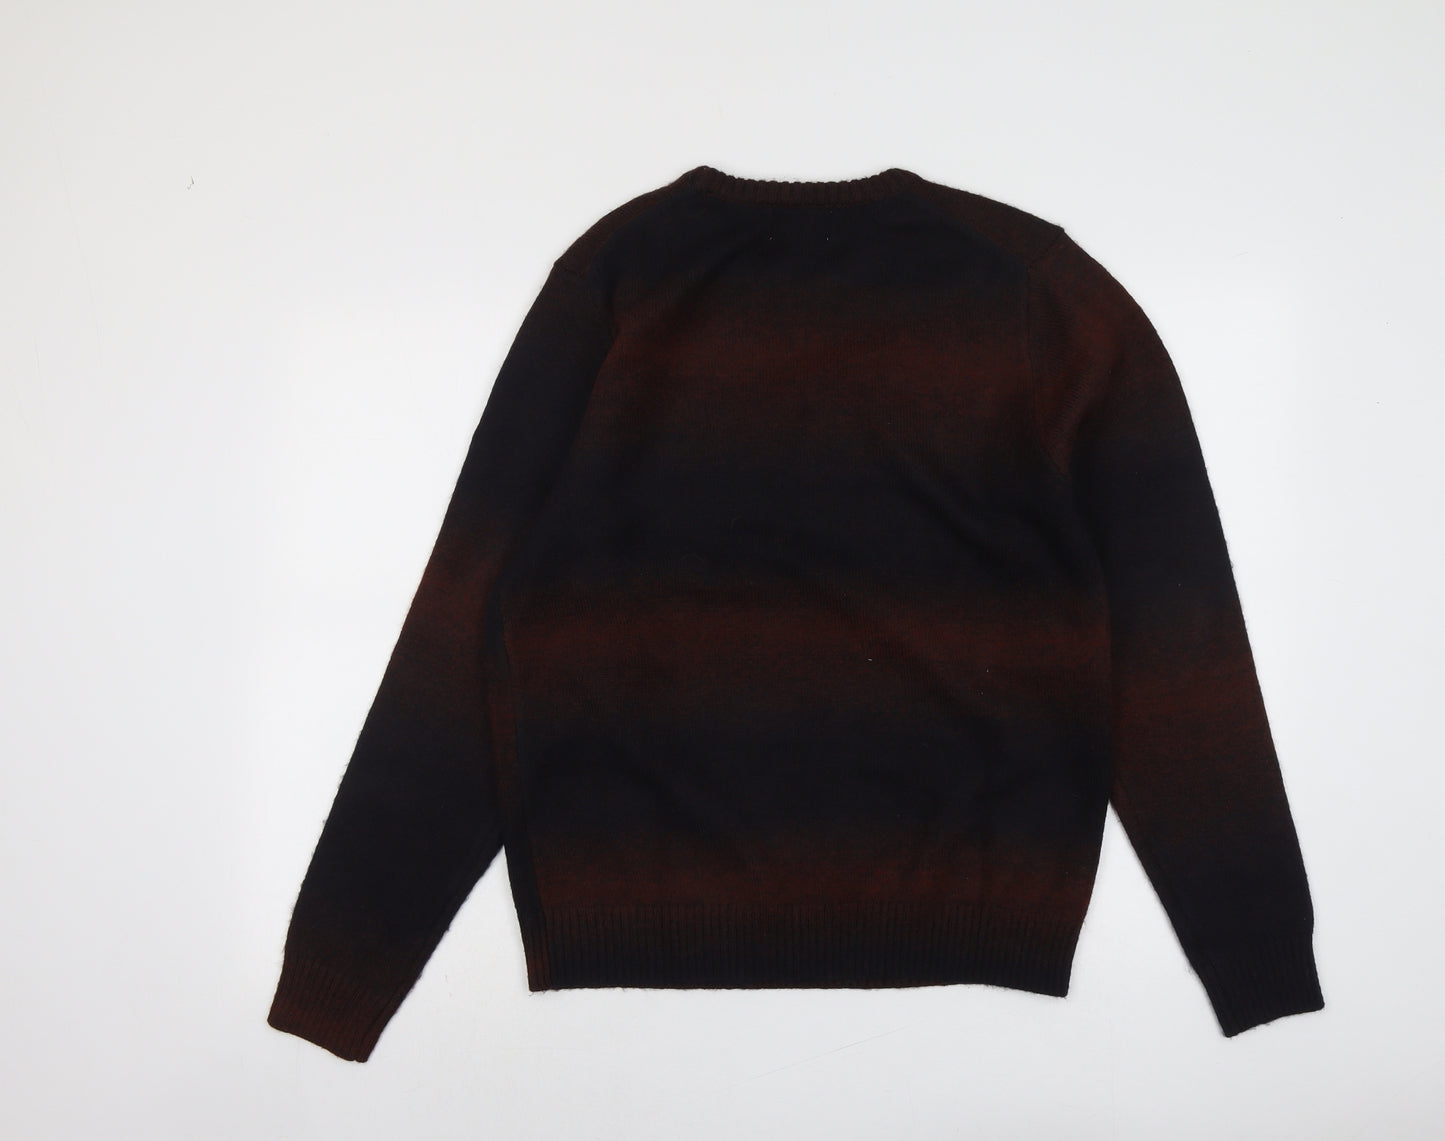 Marks and Spencer Mens Brown Round Neck Geometric Acrylic Pullover Jumper Size M Long Sleeve - Colourblock